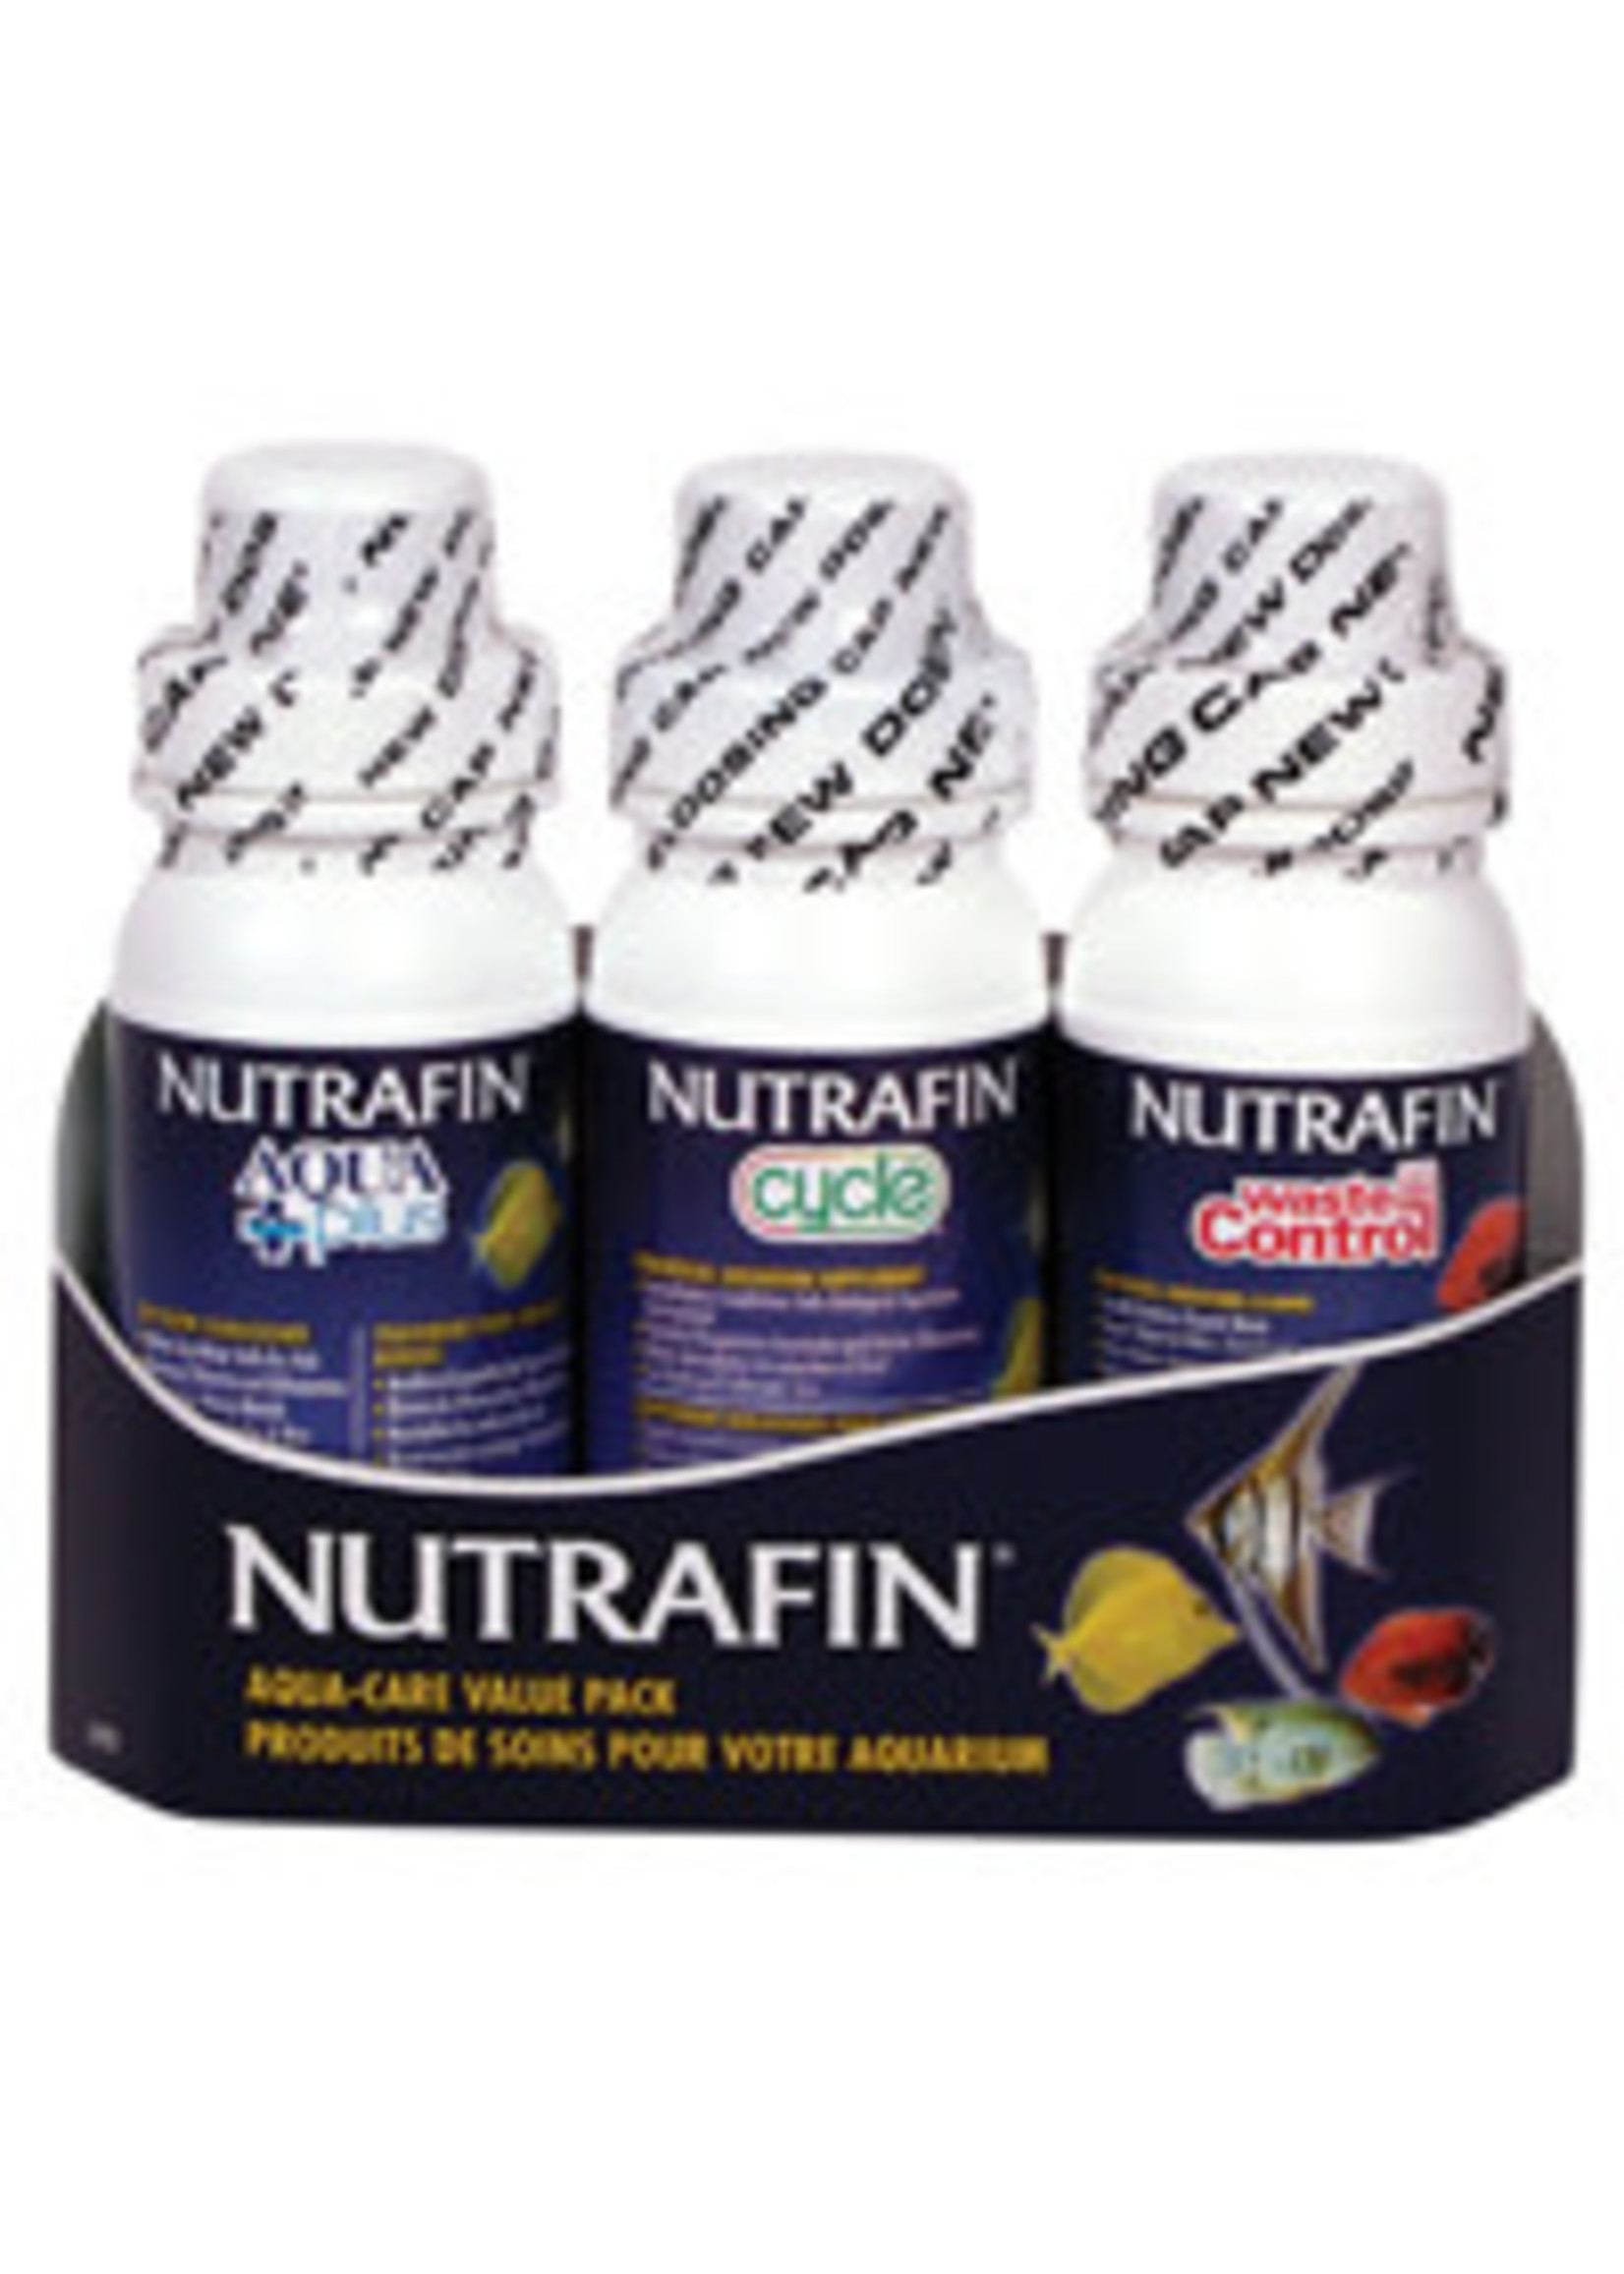 Nutrafin Nutrafin - Cycle-Waste Control 3 Pack